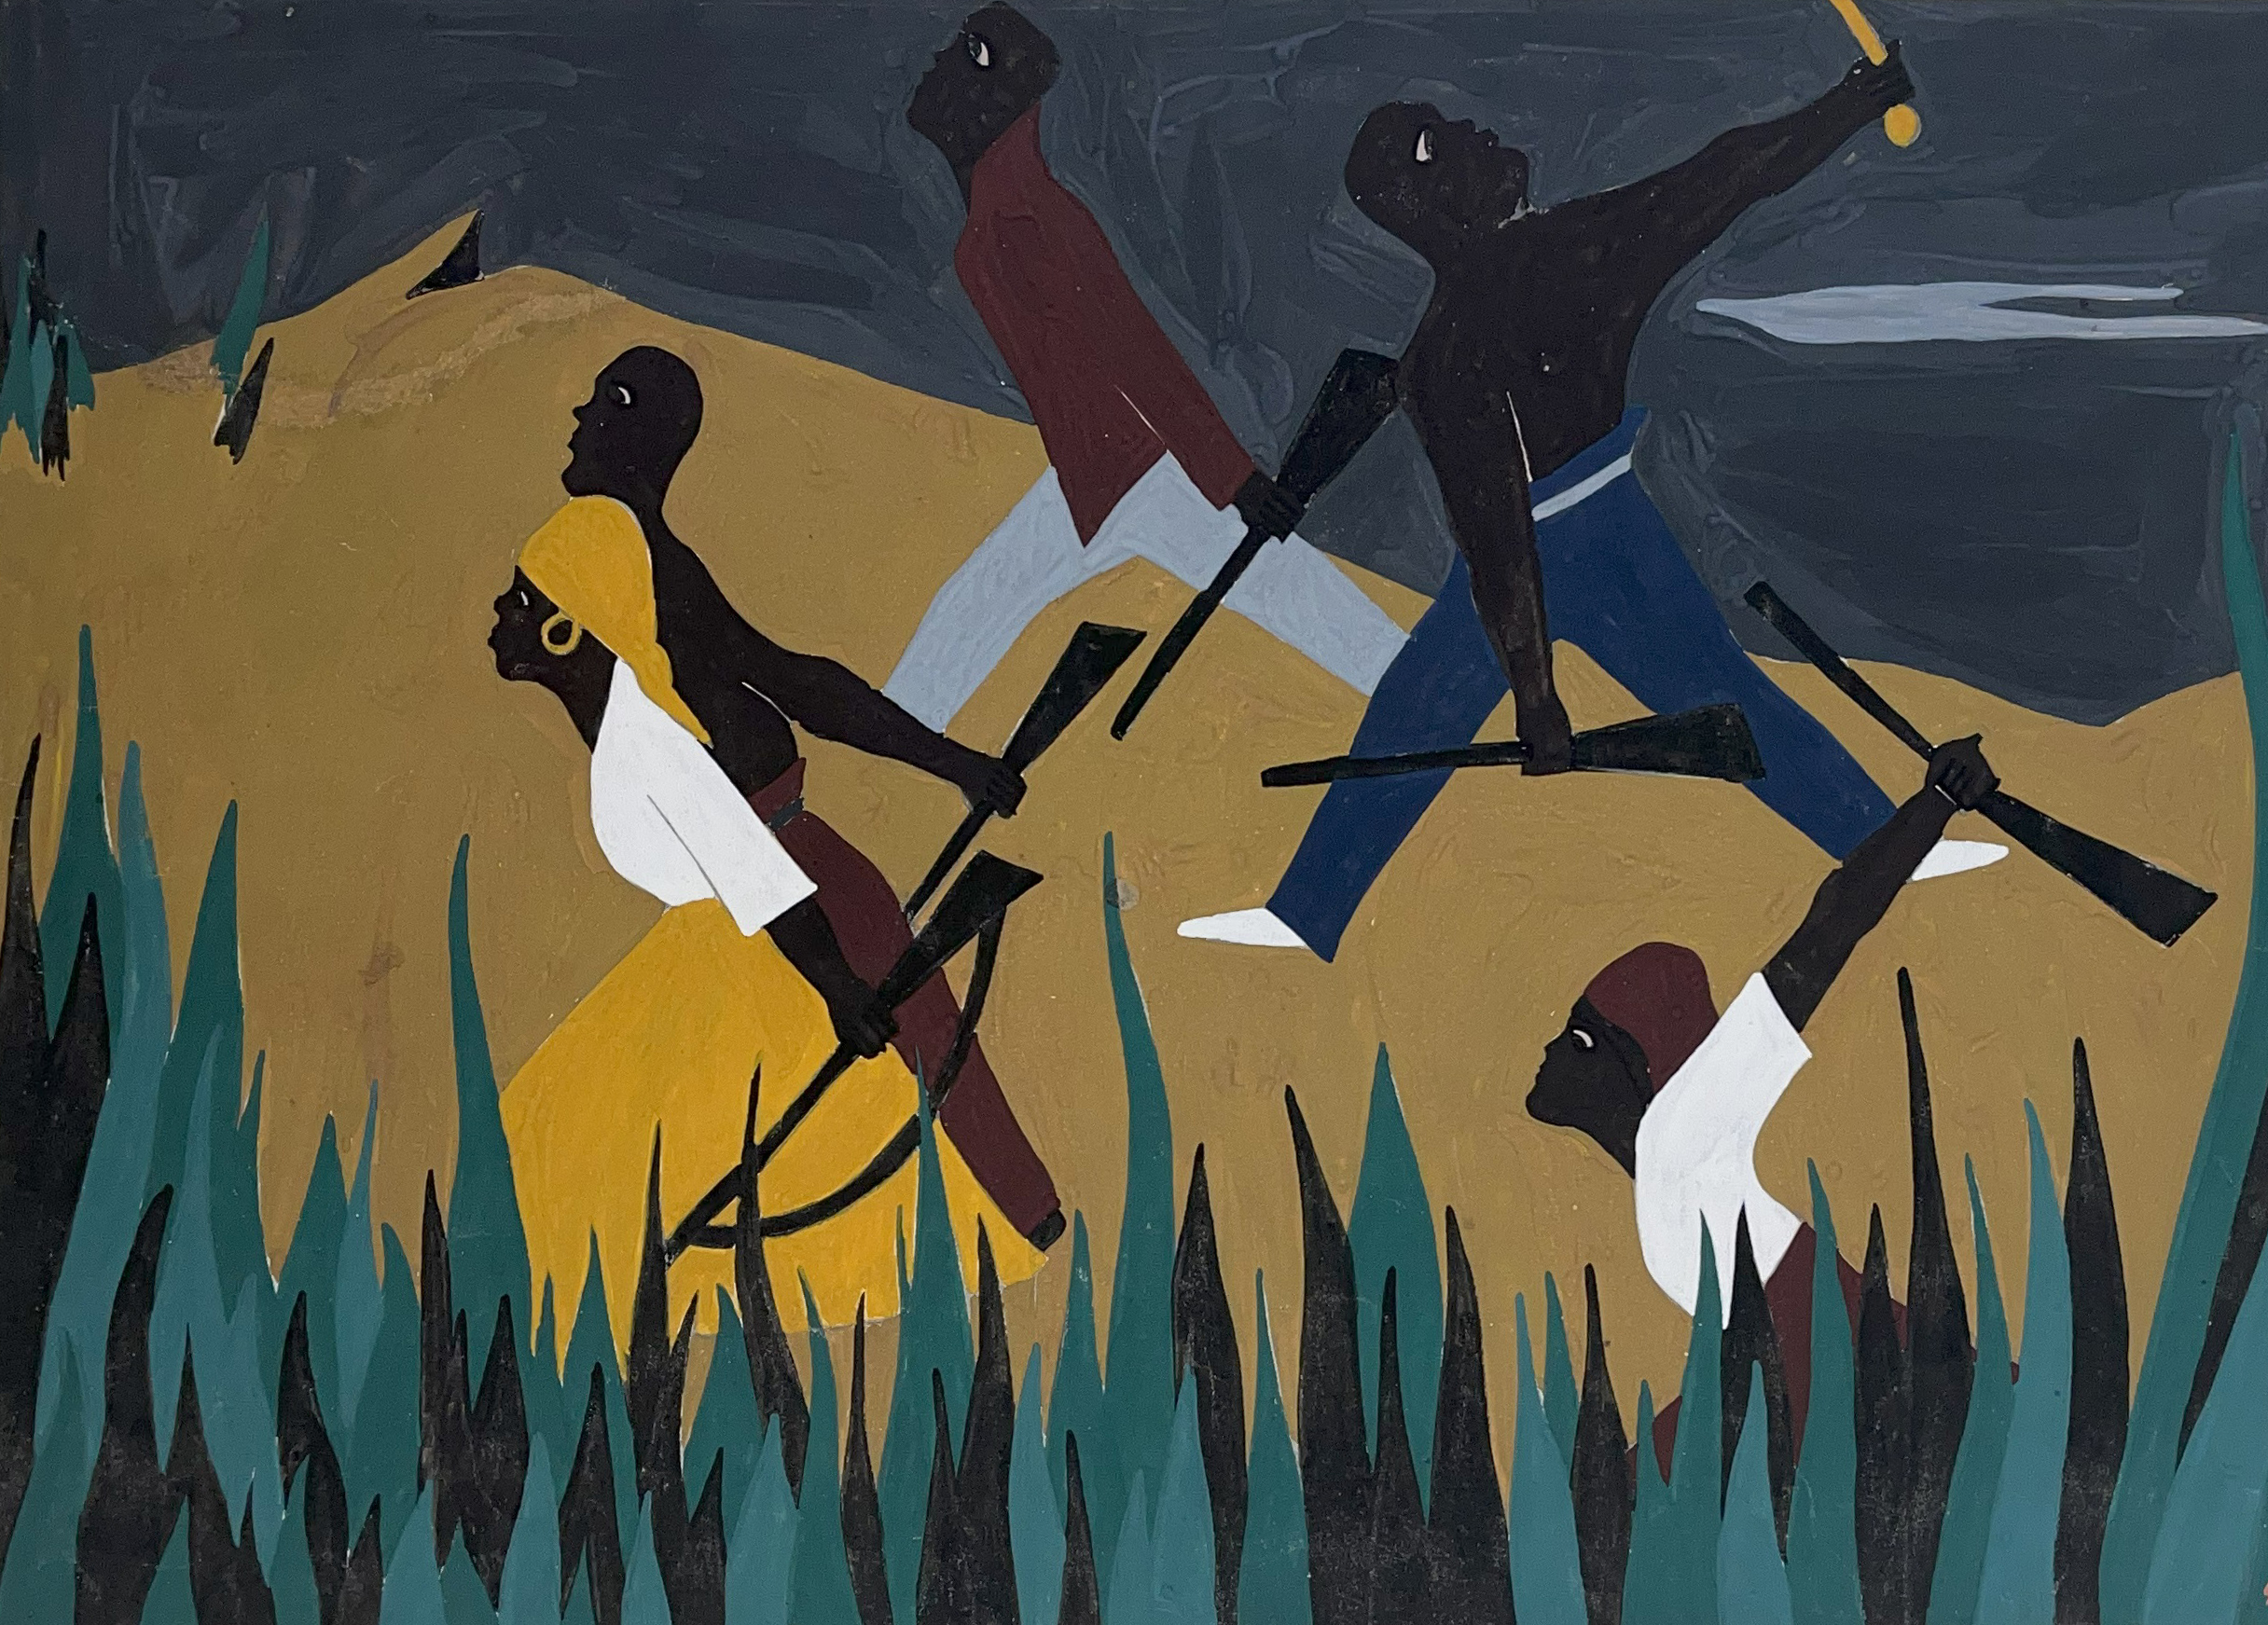 detail of another painting in the series depicting a scene from the Haitian Revolution